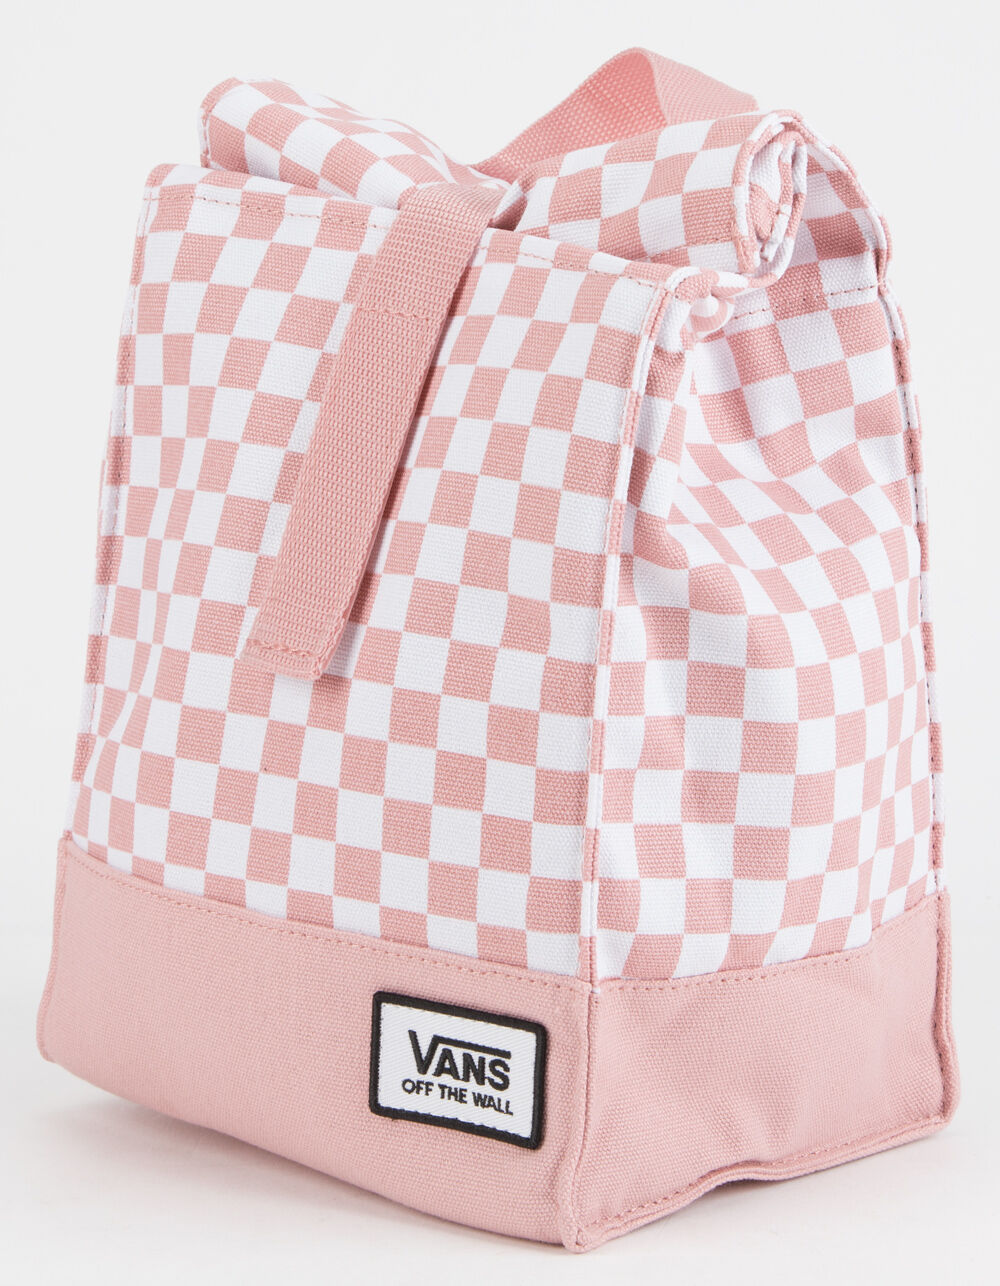 VANS Mow Pink Checkerboard Lunch Bag